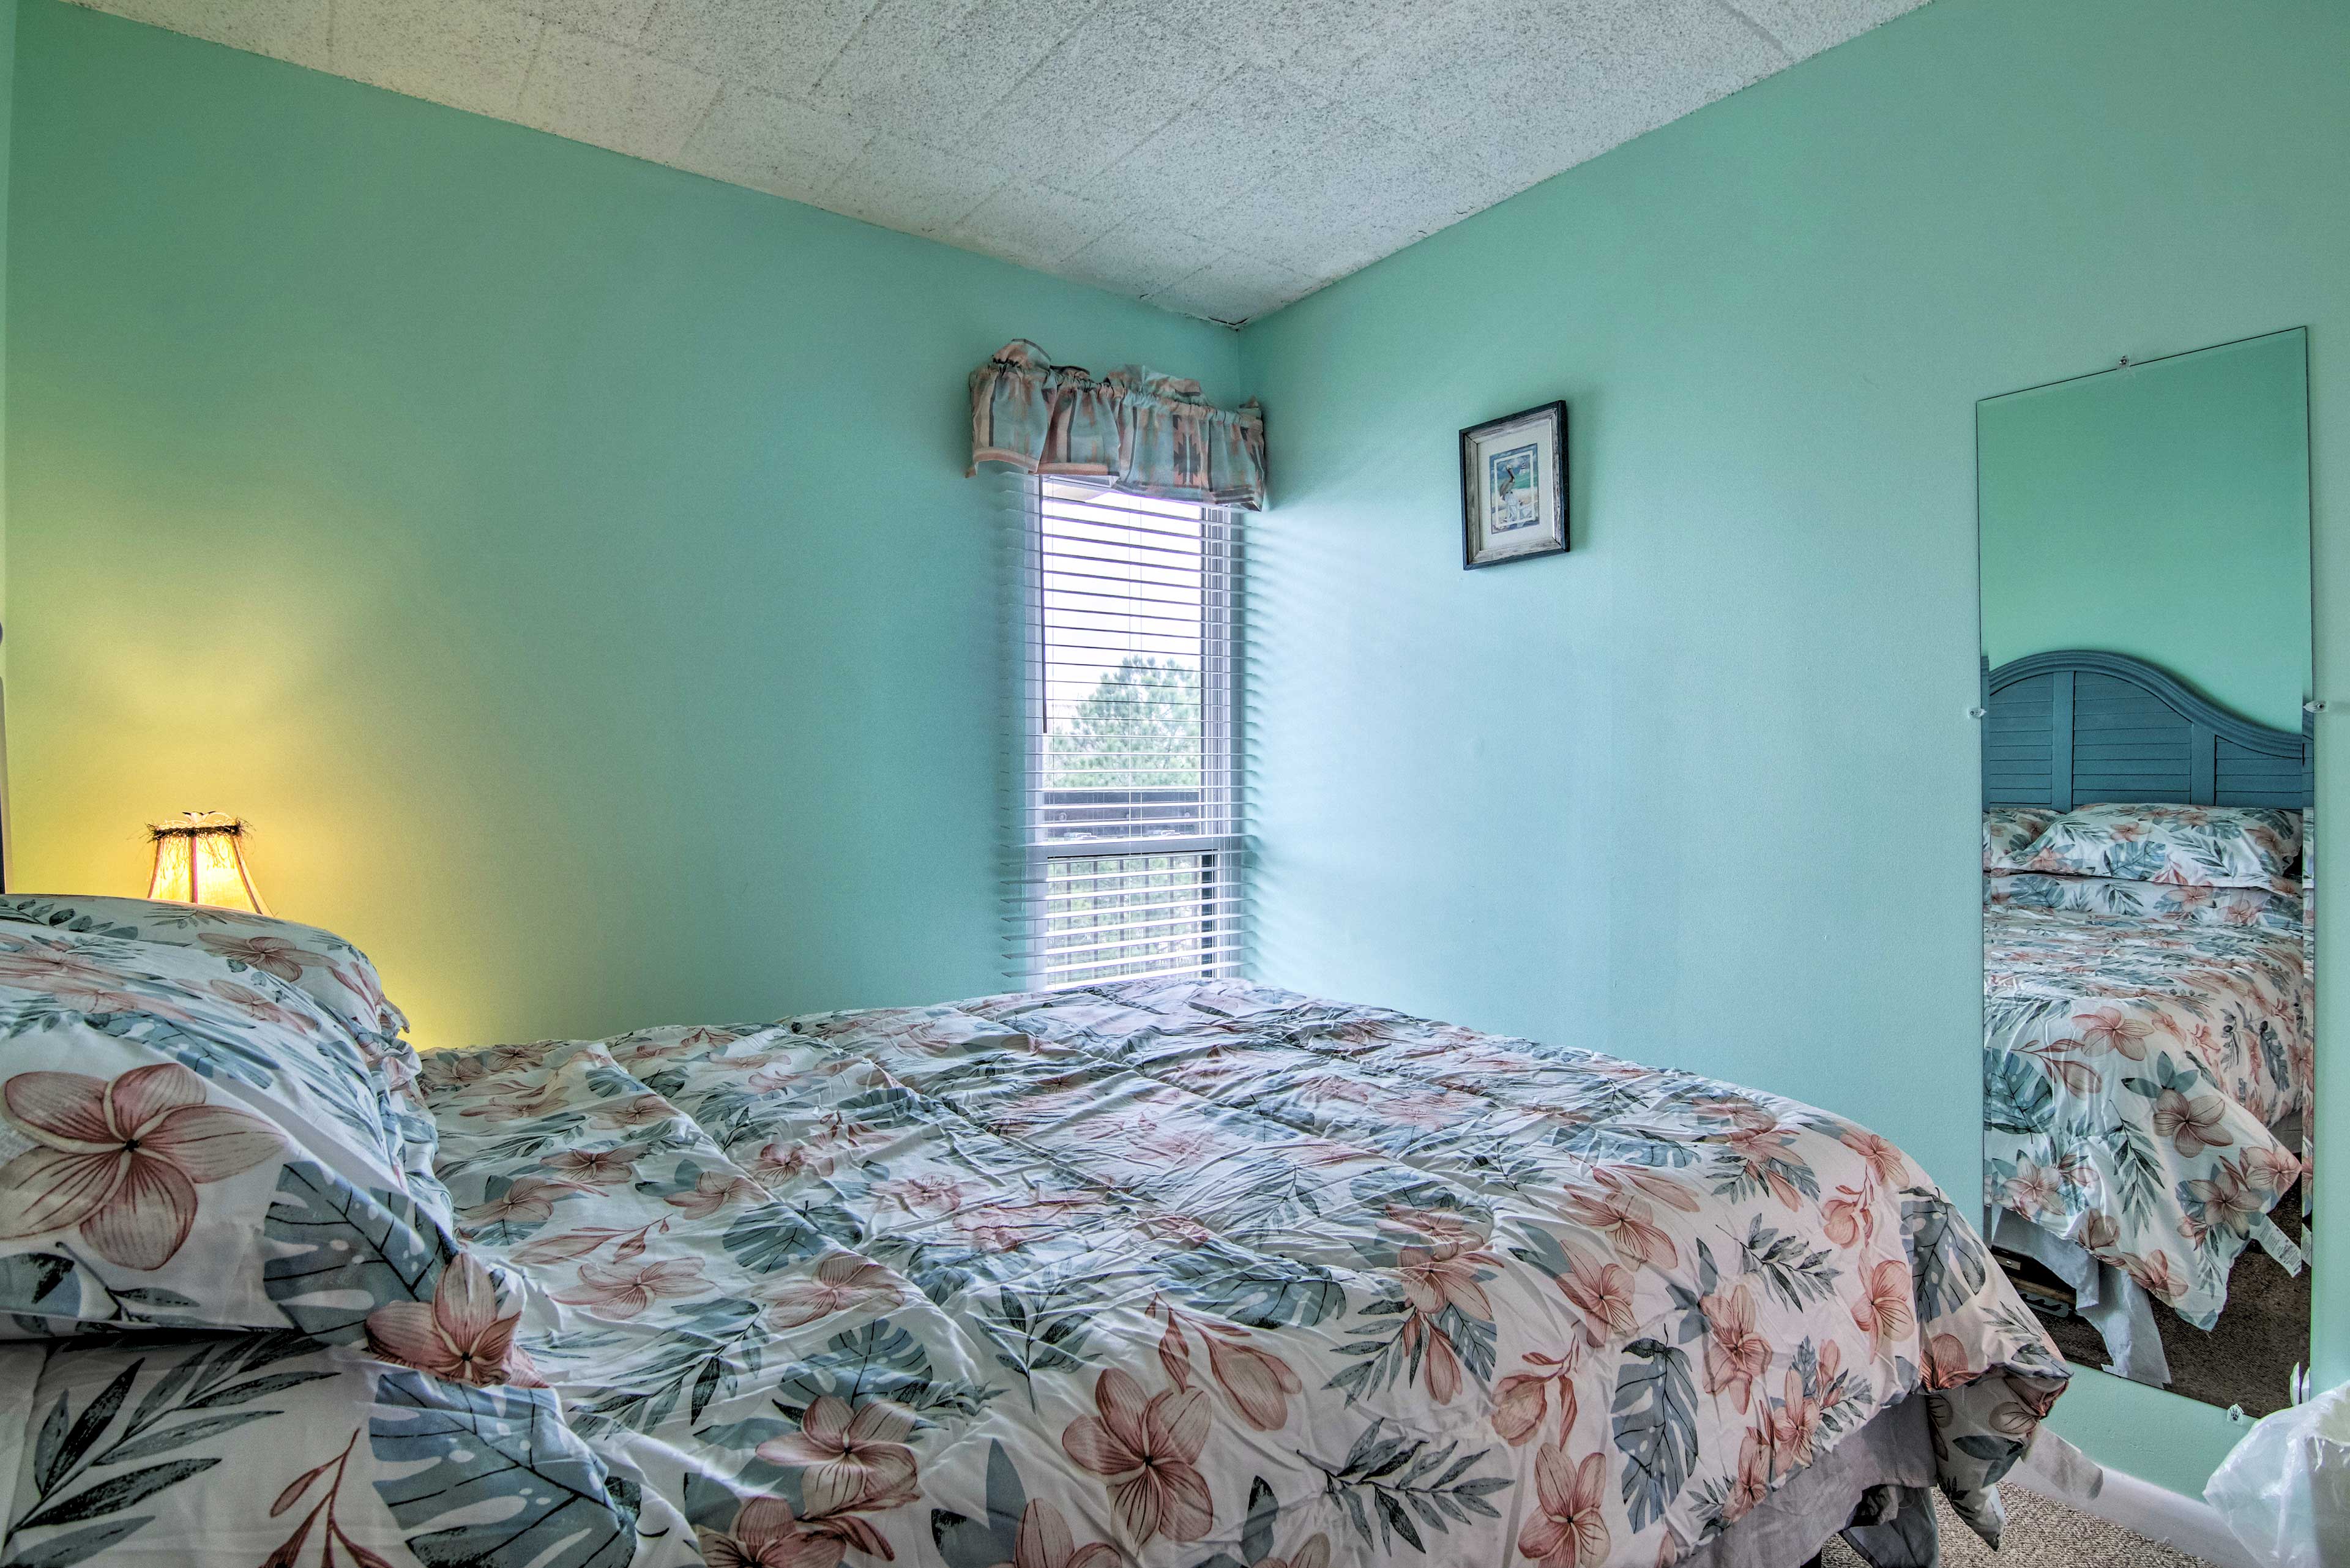 The second bedroom has a queen bed and coastal-style bedding.